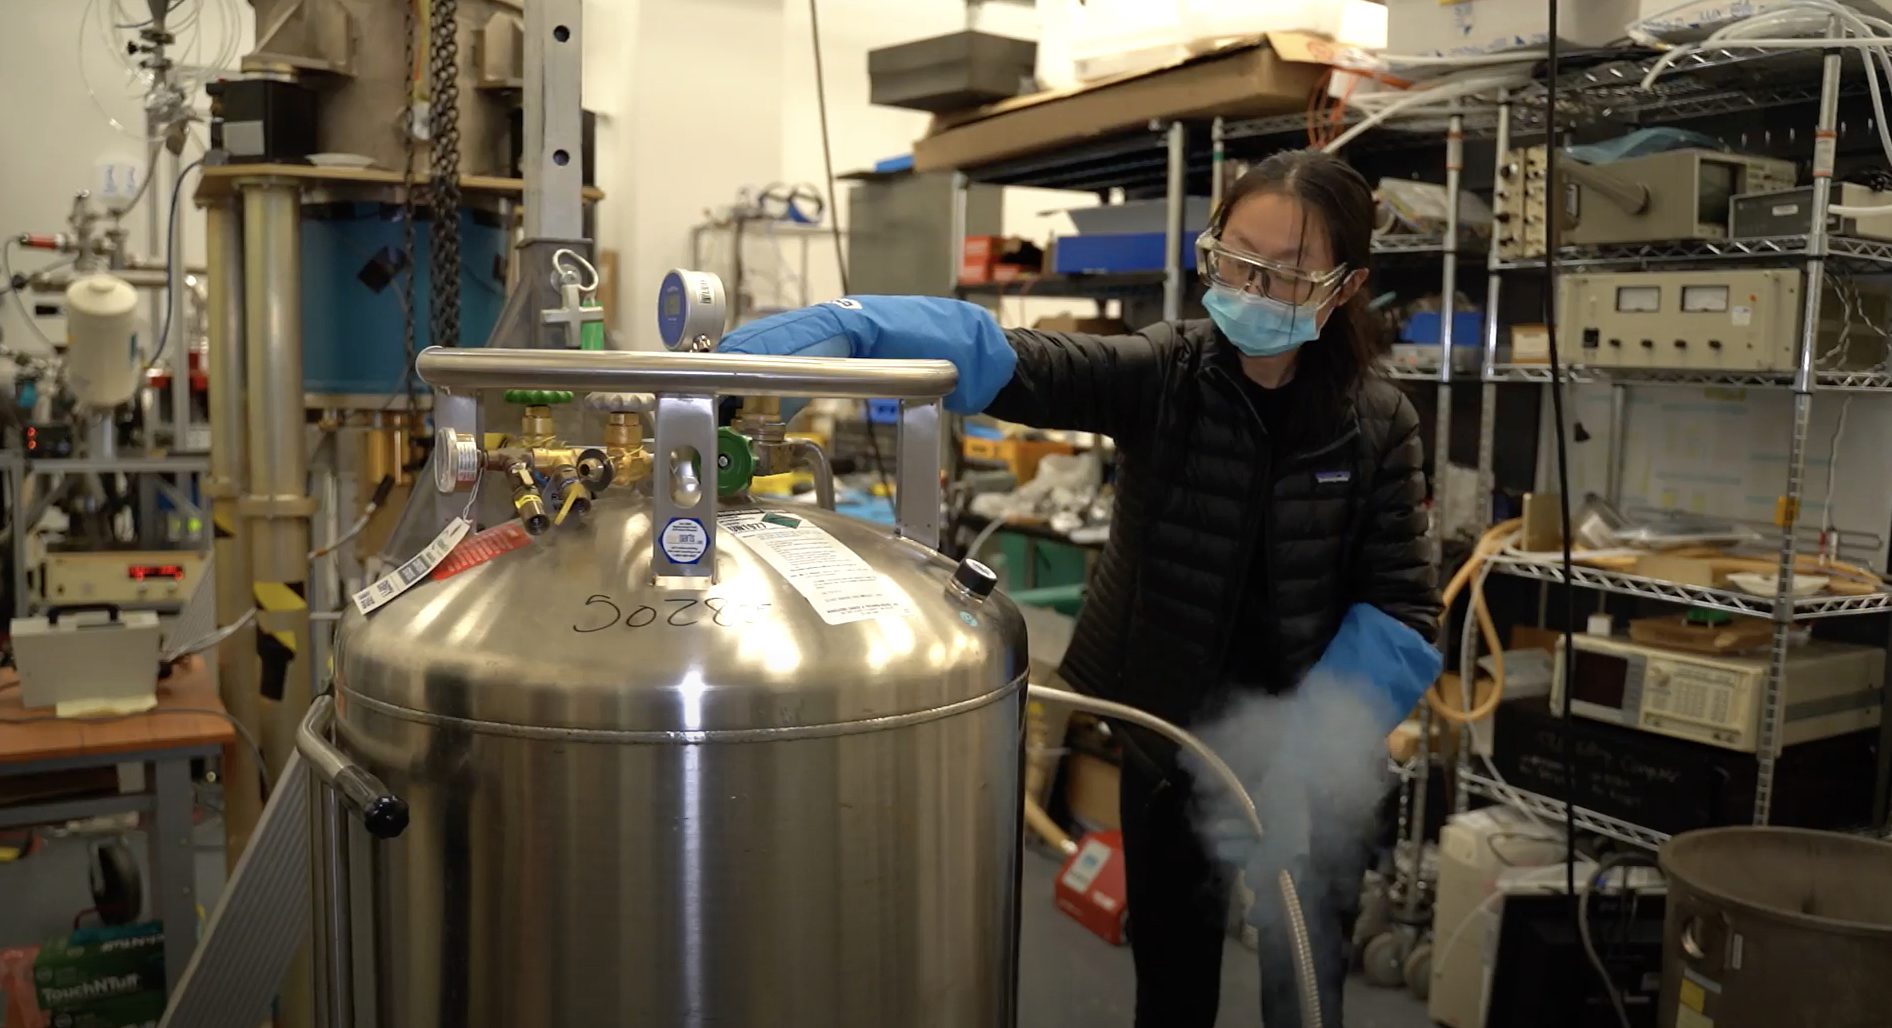 Clemson physics graduate student Yang Yang works with an EBIT machine at the Smithsonian Astrophysics Observatory